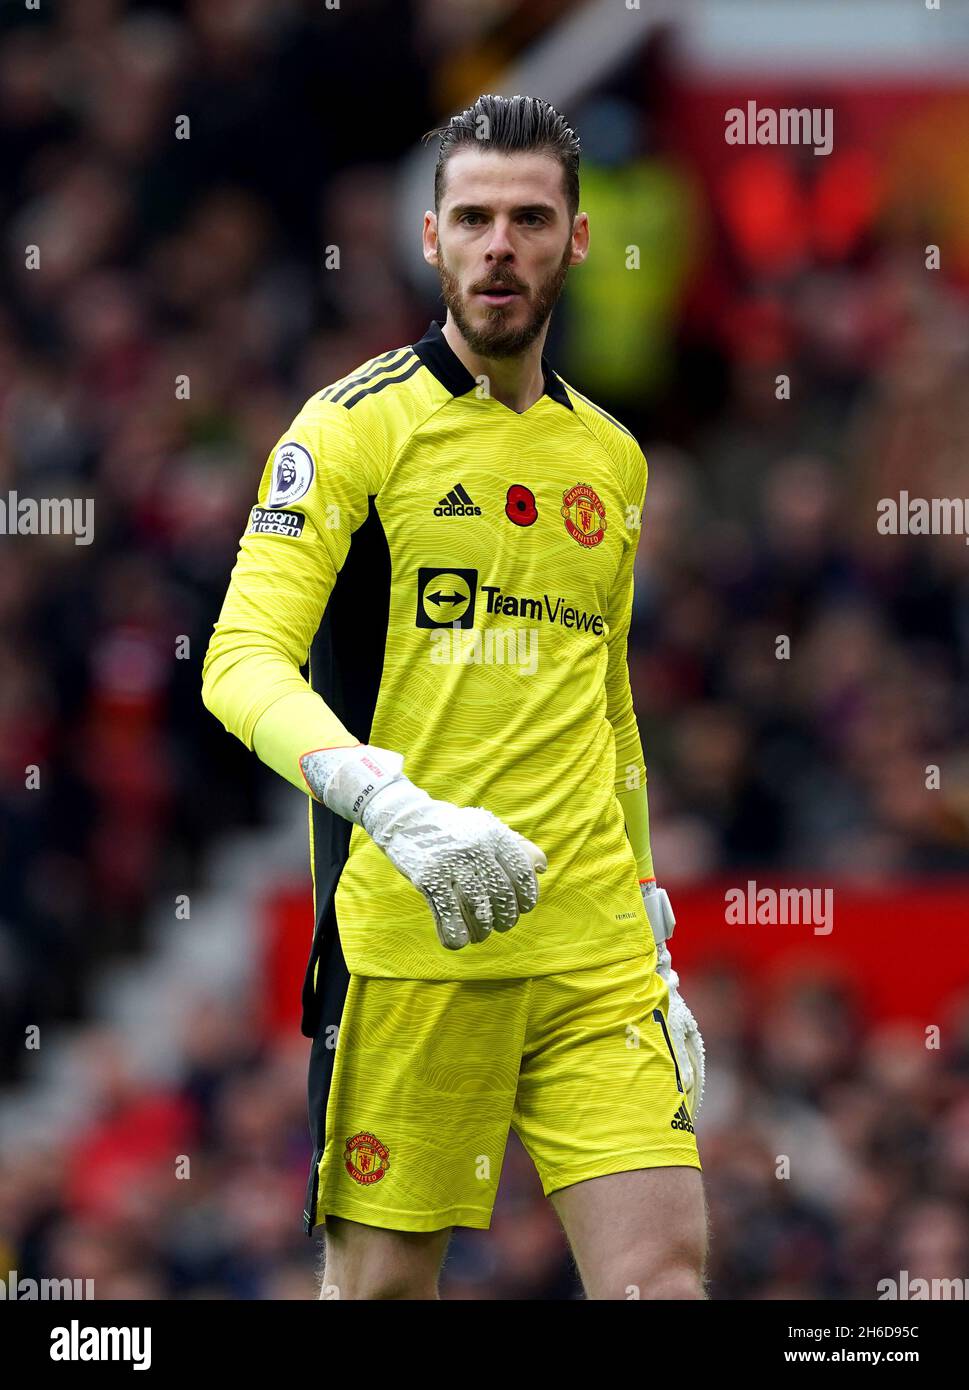 Manchester United goalkeeper David de Gea during the Premier League match  at Old Trafford, Manchester. Picture date: Saturday November 6, 2021 Stock  Photo - Alamy